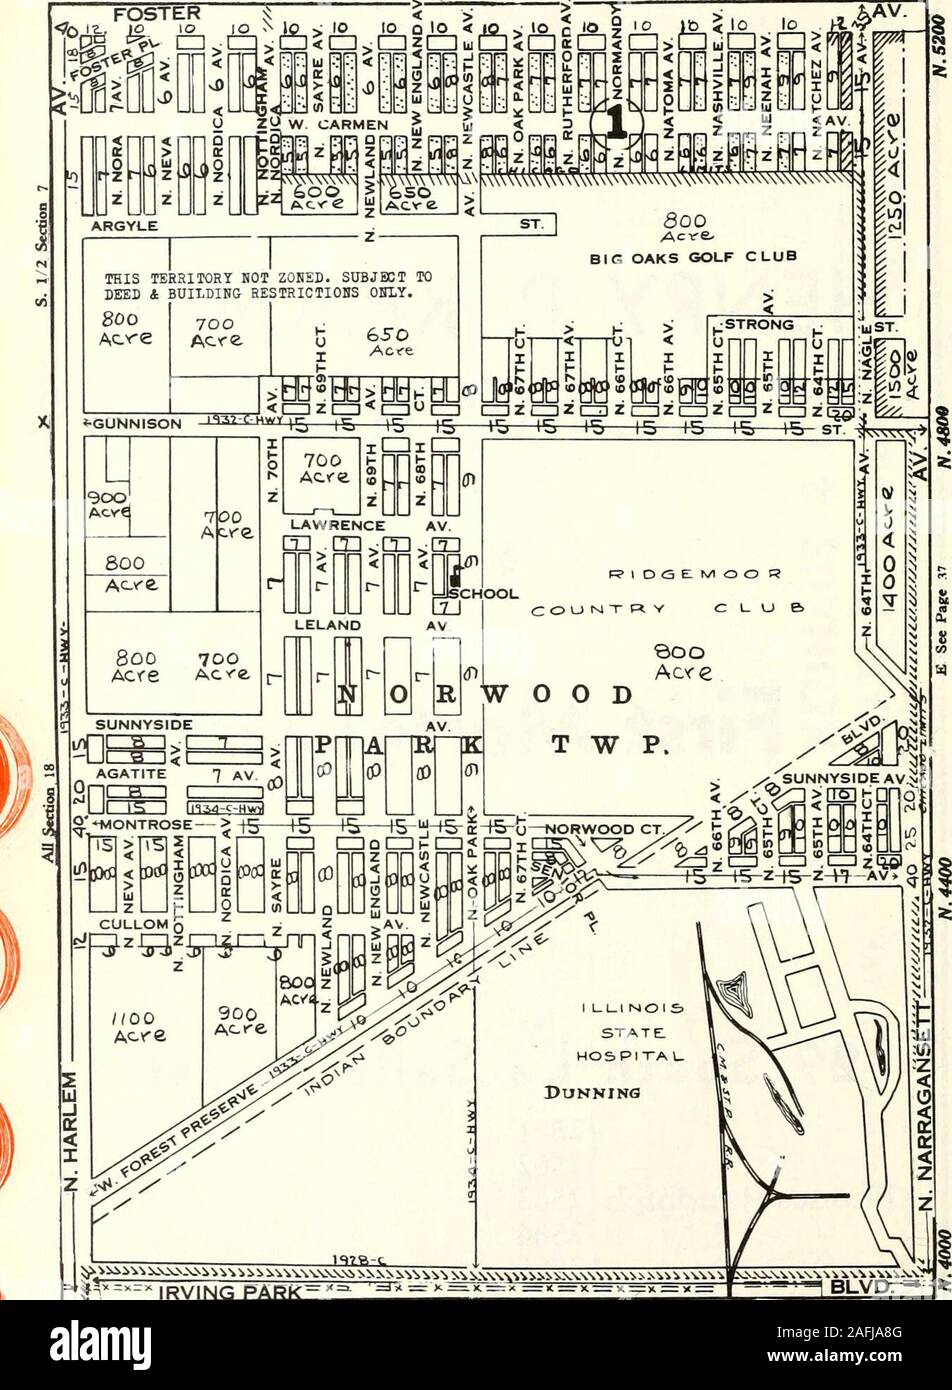 . Olcott's land values blue book of Chicago. W.iooo W. 1600 3. See Page 43 HWi See 5 Class a-4-15-16-17-la-Aaef iSEi Sec 5 Class 6-9-11-15-16-17-18-36-Amsr SW| Seo 5 Class 3-4-14-15-16-17-18-Am9r SE-; Sec 5 Class 6-9-11-15-16-17-18-36-Amer HWJ Seo 8 Ei Class 4-6 W» Class Z-4-14-15-16-17-18 NEt Sec 8 Class 6-9-11-15-16-17-18-36-Amer OLCOTTS LAND VALUES BLUE BOOK Since 1885 HENRY P. KRANSZCOMPANY First Mortgages 29 South La Salle Street 2561j2562 Phones Randolph (256312564,2565 36 OLCOTTS LAND VALUES & ZONING 1936 T. 40 N.—R. 13 B. N. See Page 28 FOSTER. IRVINC^PARk==- =? iOOO.N.^ Wv W i W.7200 Stock Photo